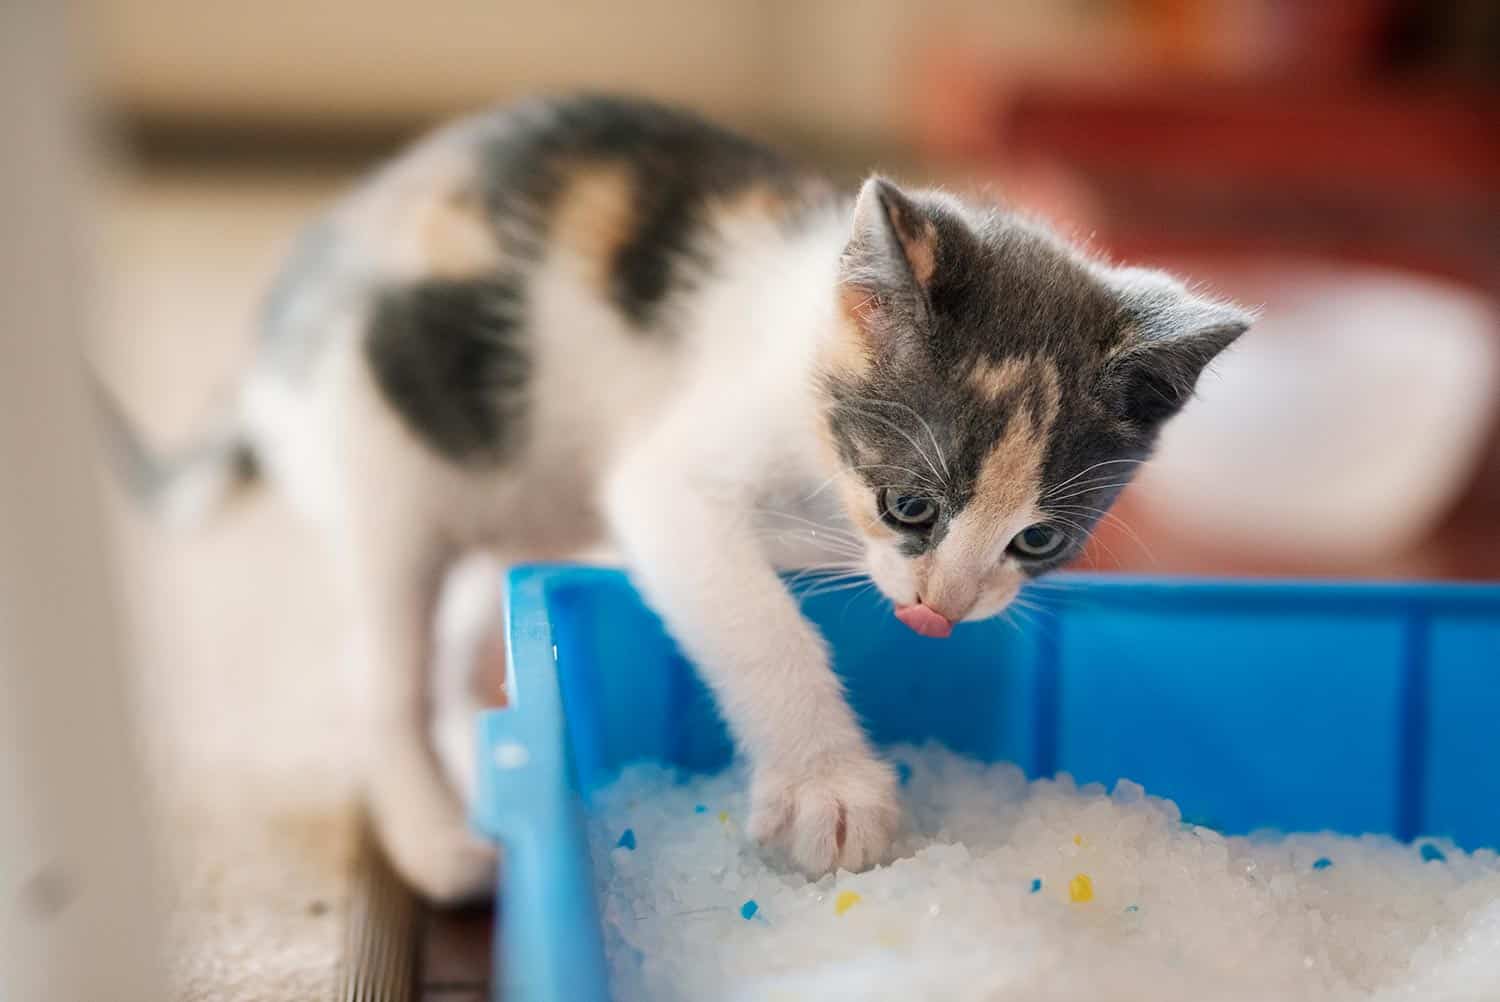 Adorable little kitten scratching around in his litter box on the floor